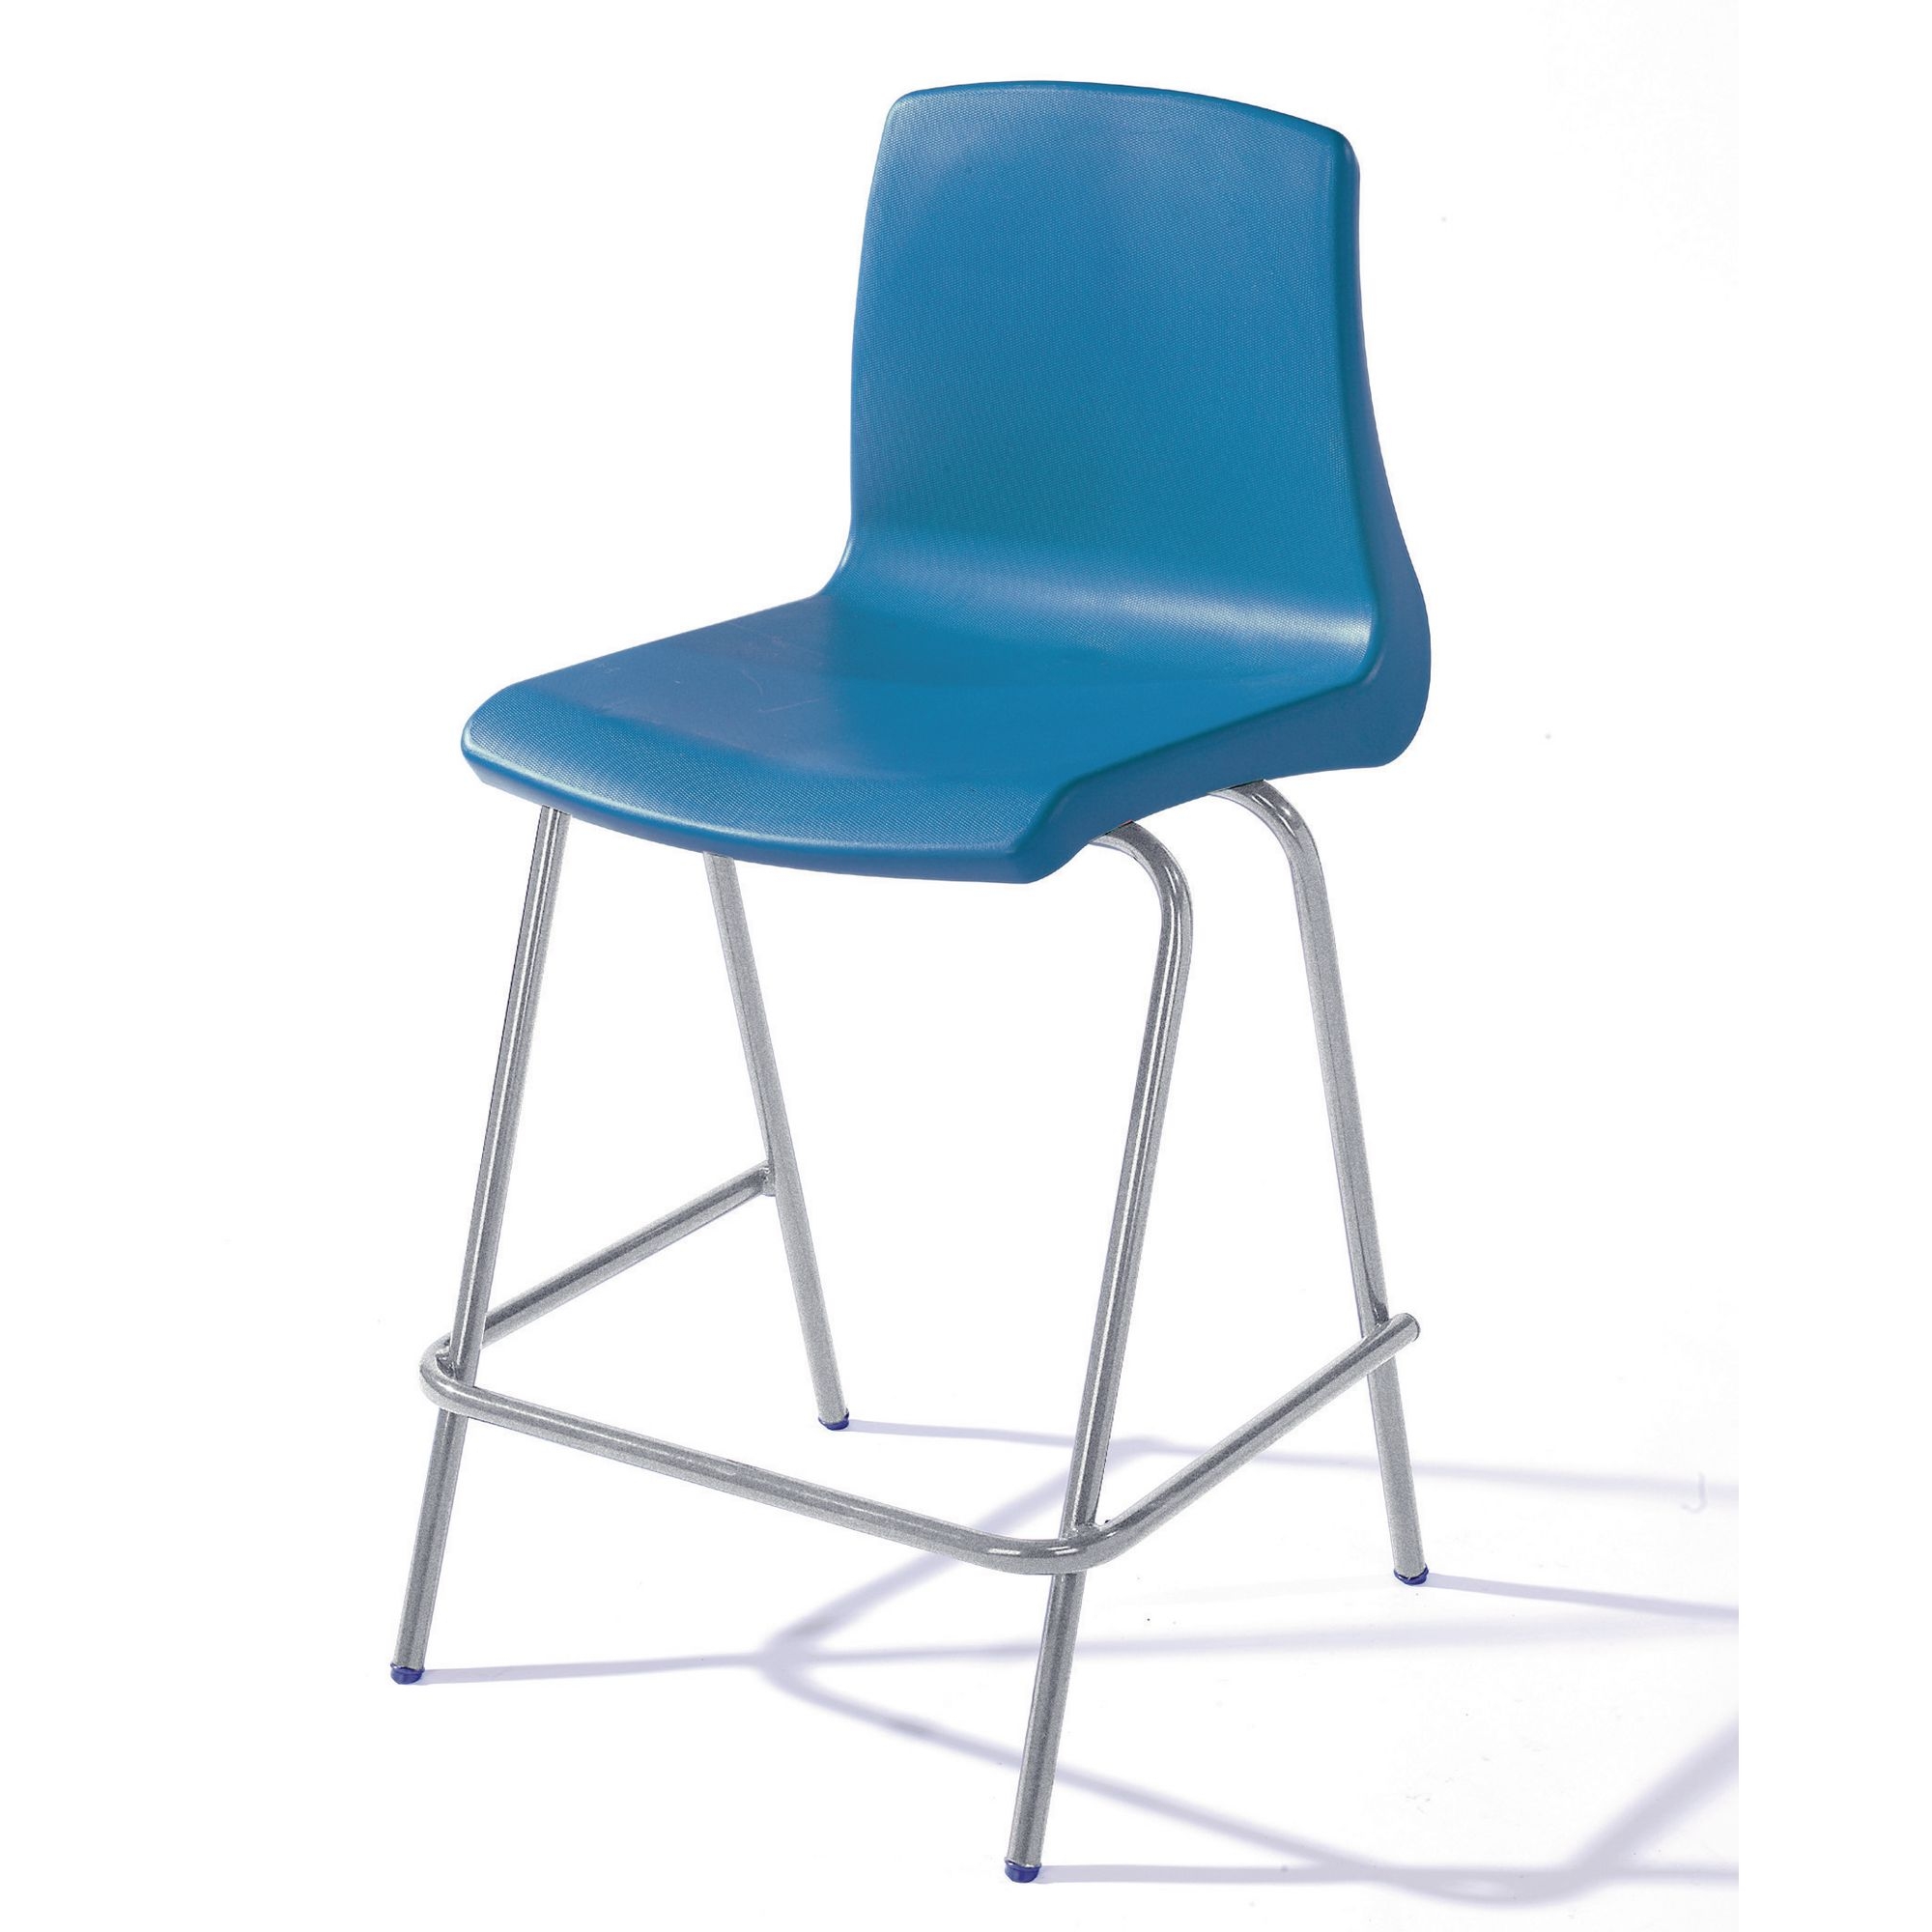 NP Stool - Seat height: 610mm - Blue